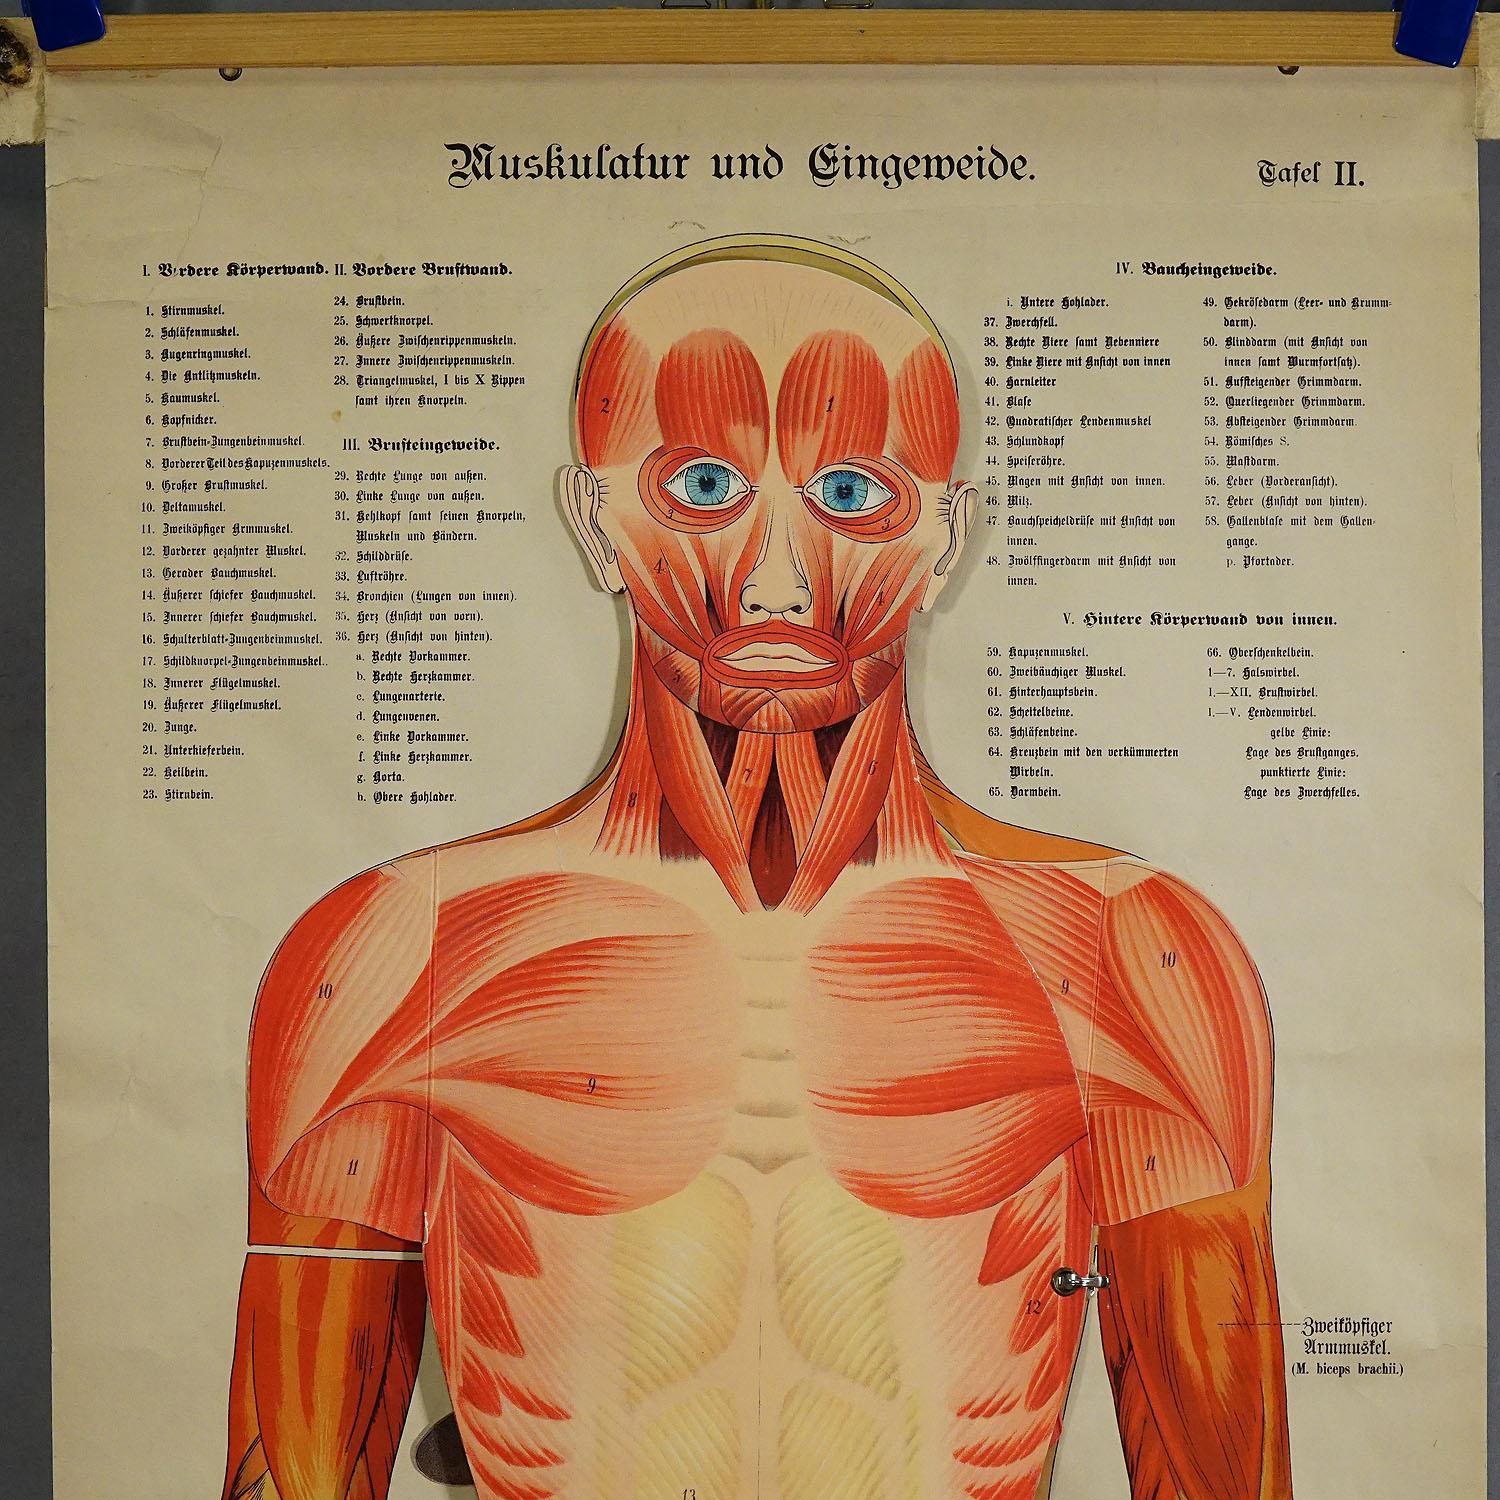 Antique Foldable Anatomical Wall Chart Depicting Human Musculature

The rare 19th century anatomical wall chart depicts the human musculature and internal organs. The multicolored human organs like lung, heart, liver, kidney etc. are removable. By